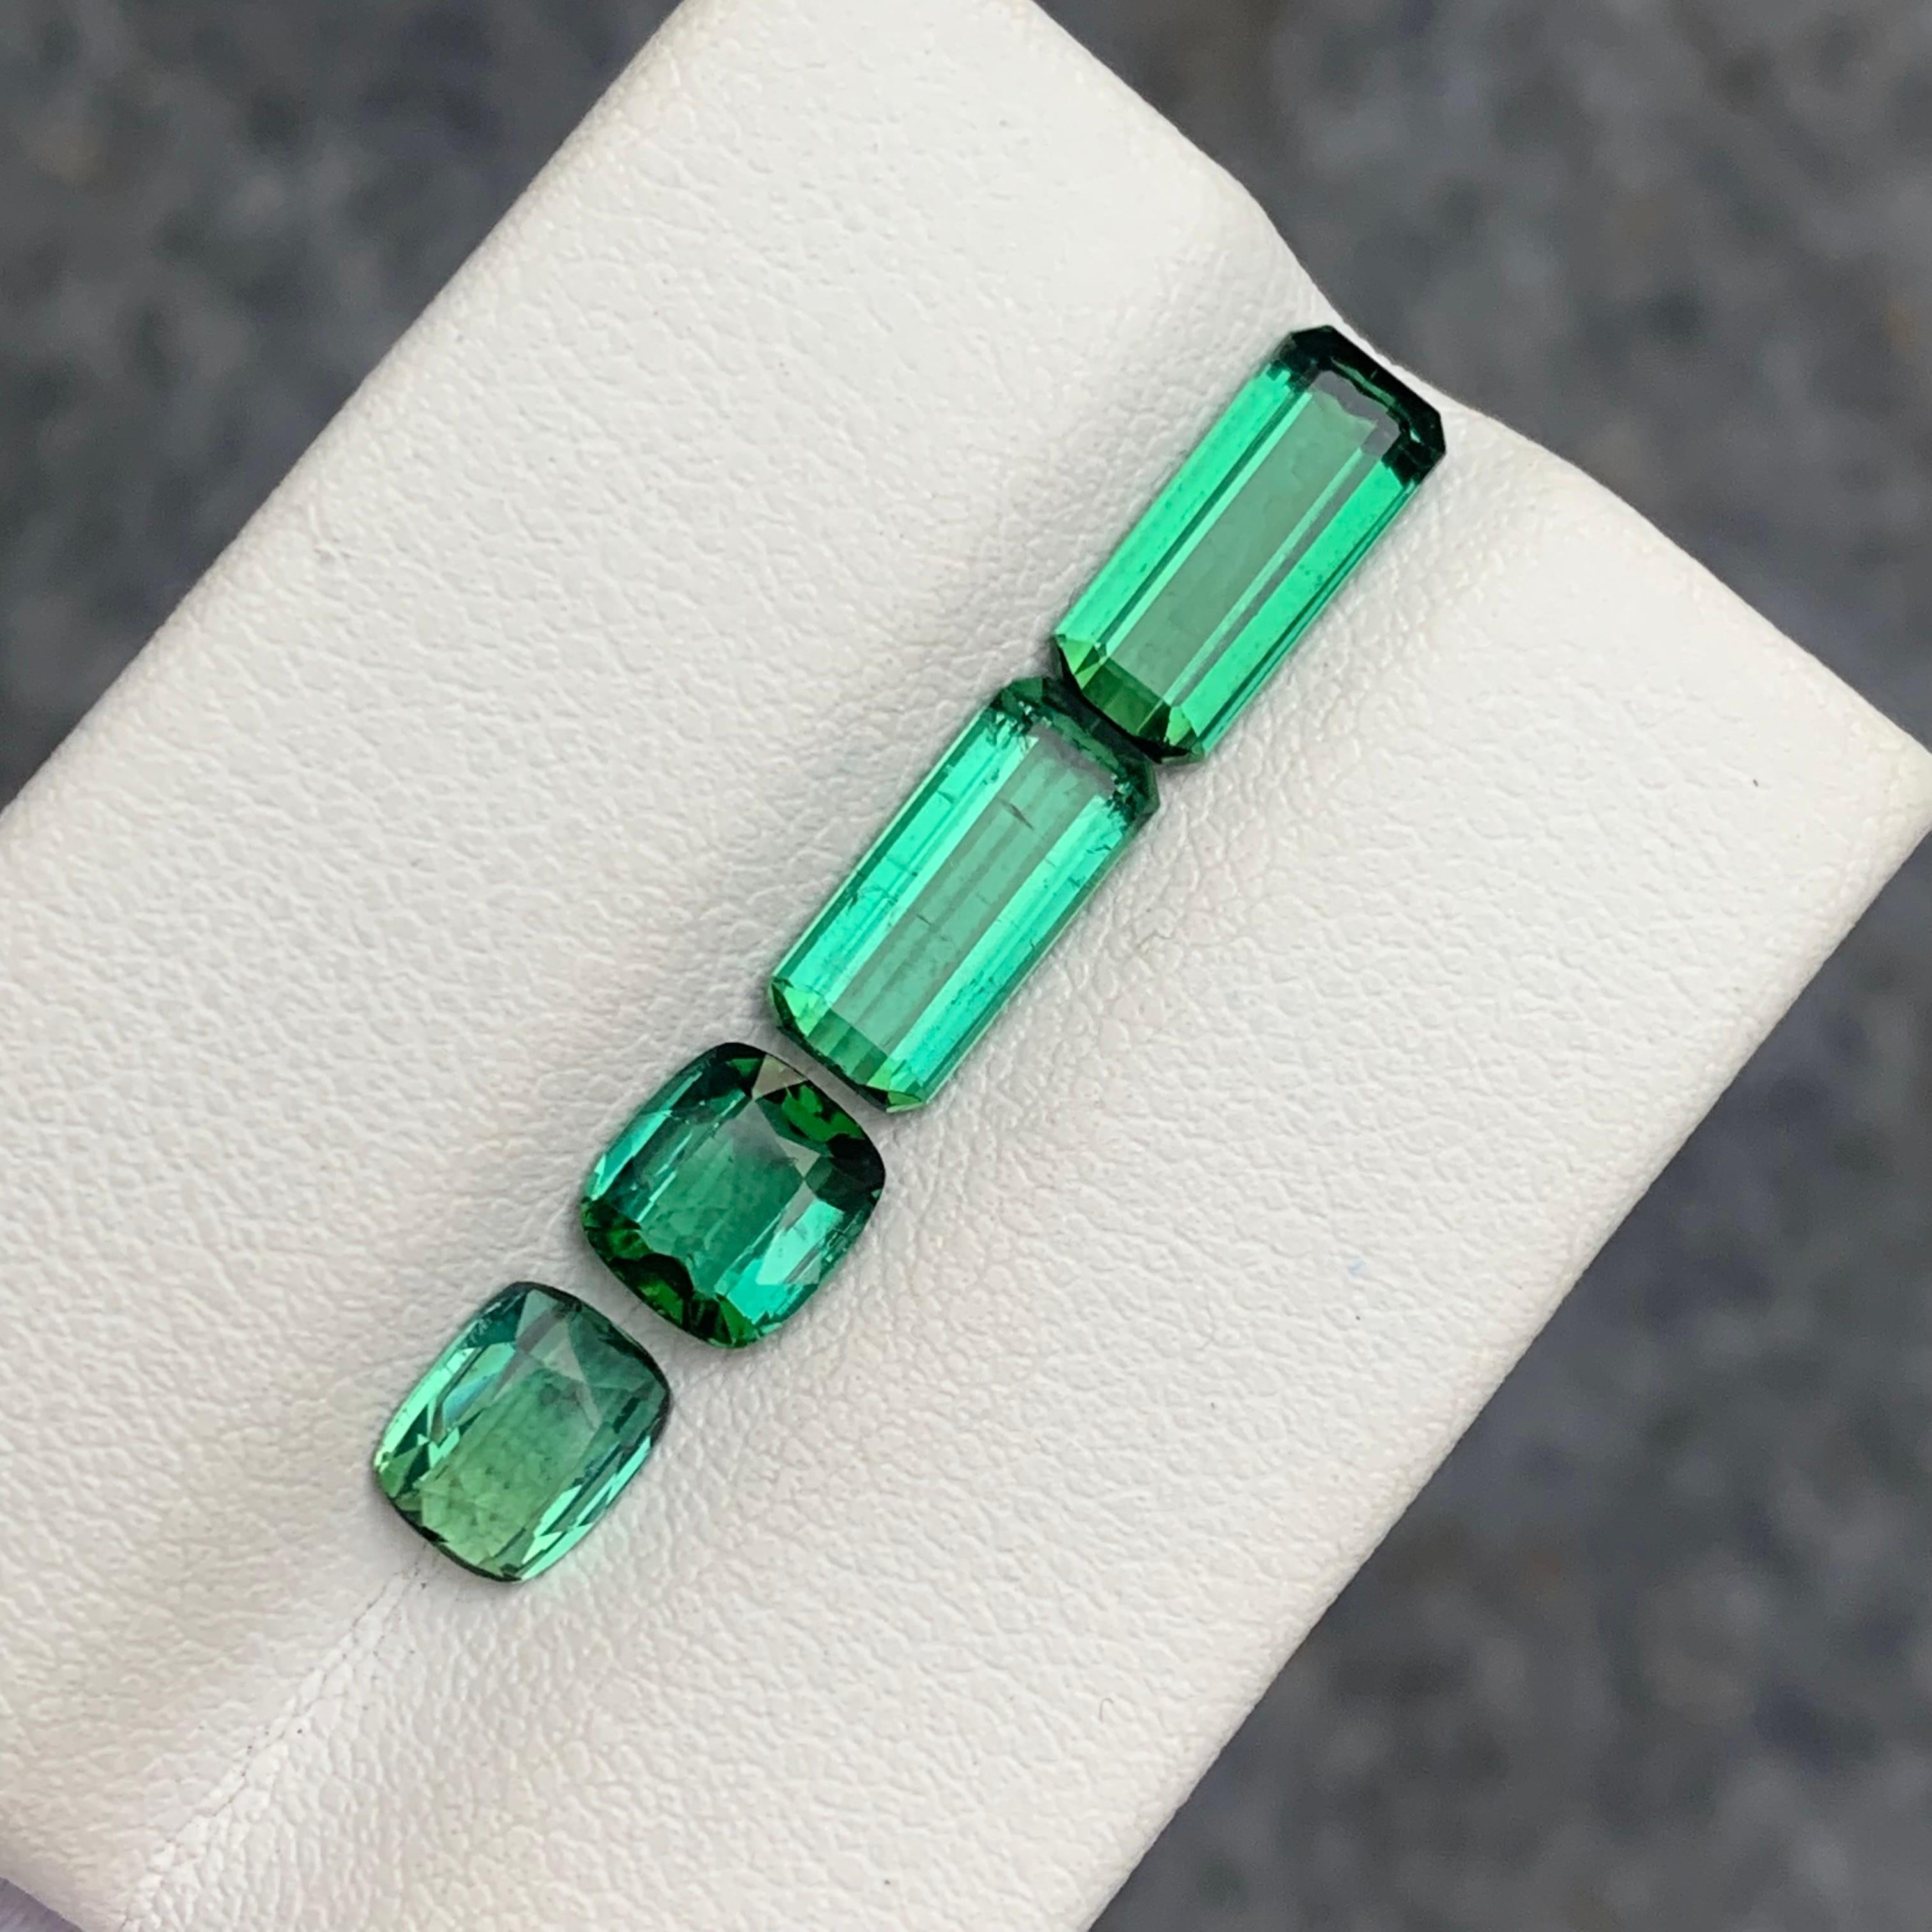 Gemstone Type : Tourmaline
Weight : 4.65 Carats
Sizes: 0.65 to 1.50 Carat
Origin : Kunar Afghanistan
Clarity : SI
Shape: Emerald & Cushion
Color: Bluish green ( Lagoon)
Certificate: On Demand
Basically, mint tourmalines are tourmalines with pastel